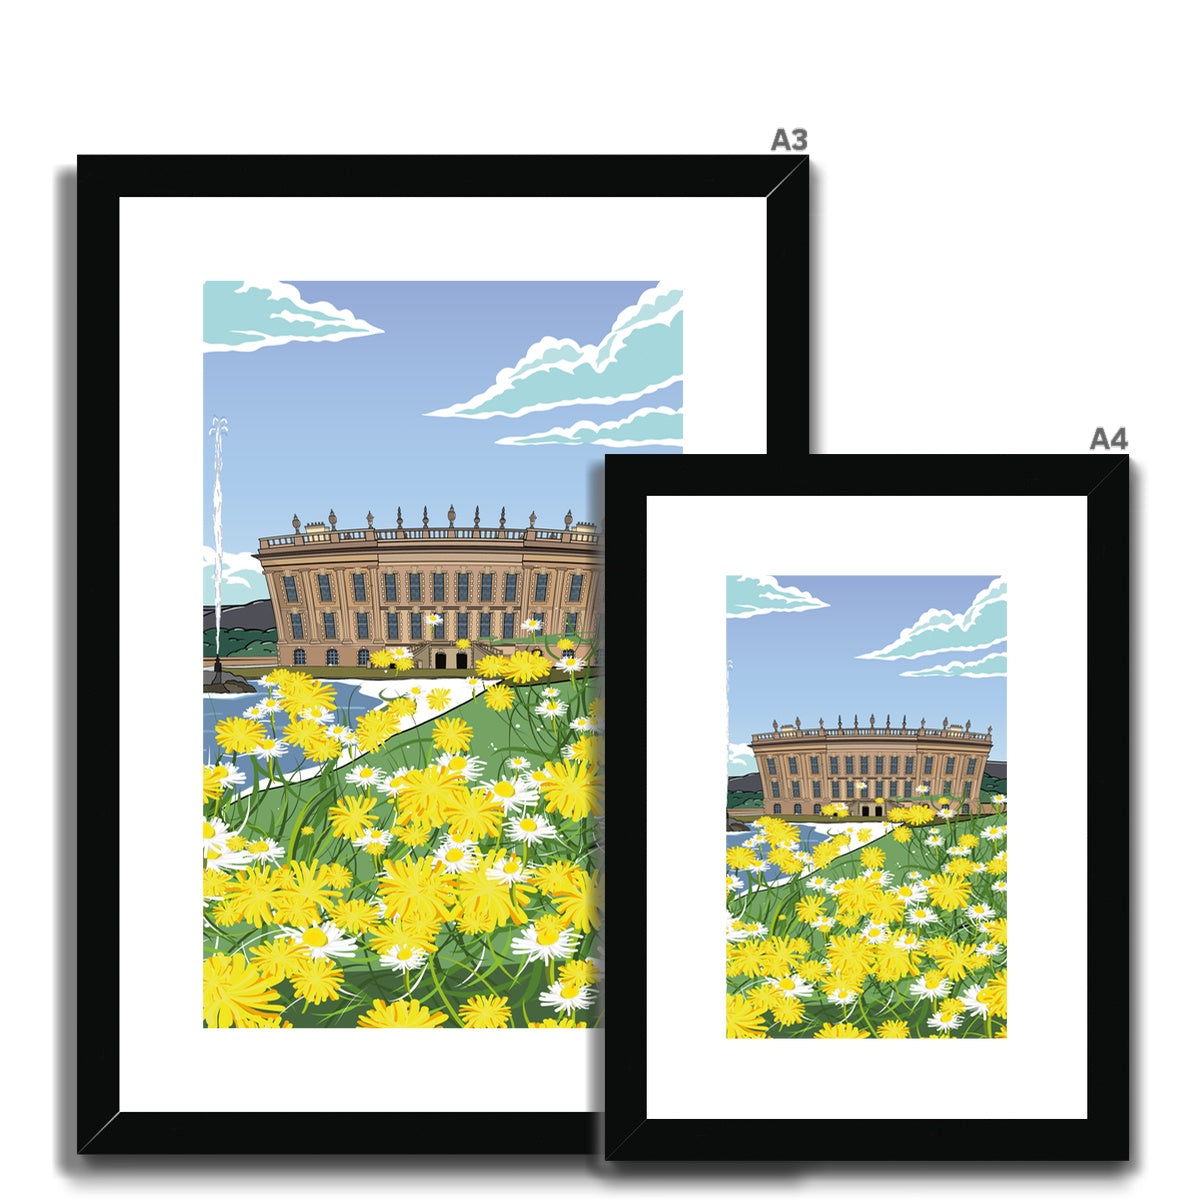 Chatsworth - In Bloom Framed & Mounted Print